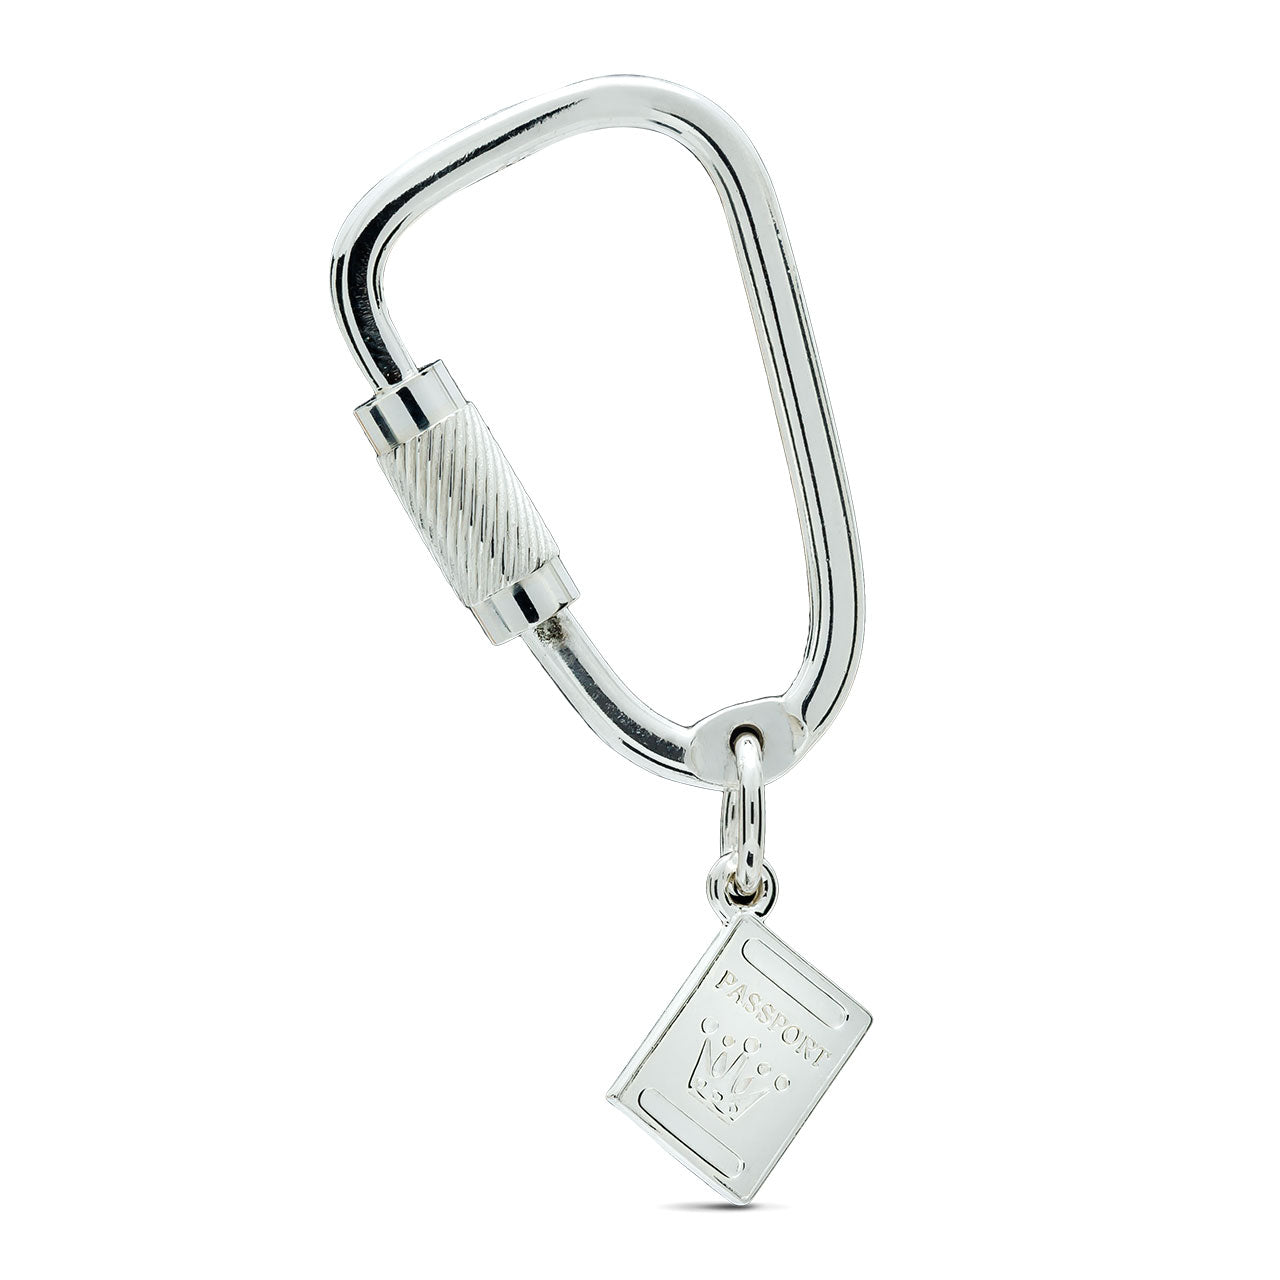 Passport Climbing Carabiner Silver Key Ring - gift for climbers travellers and world explorers